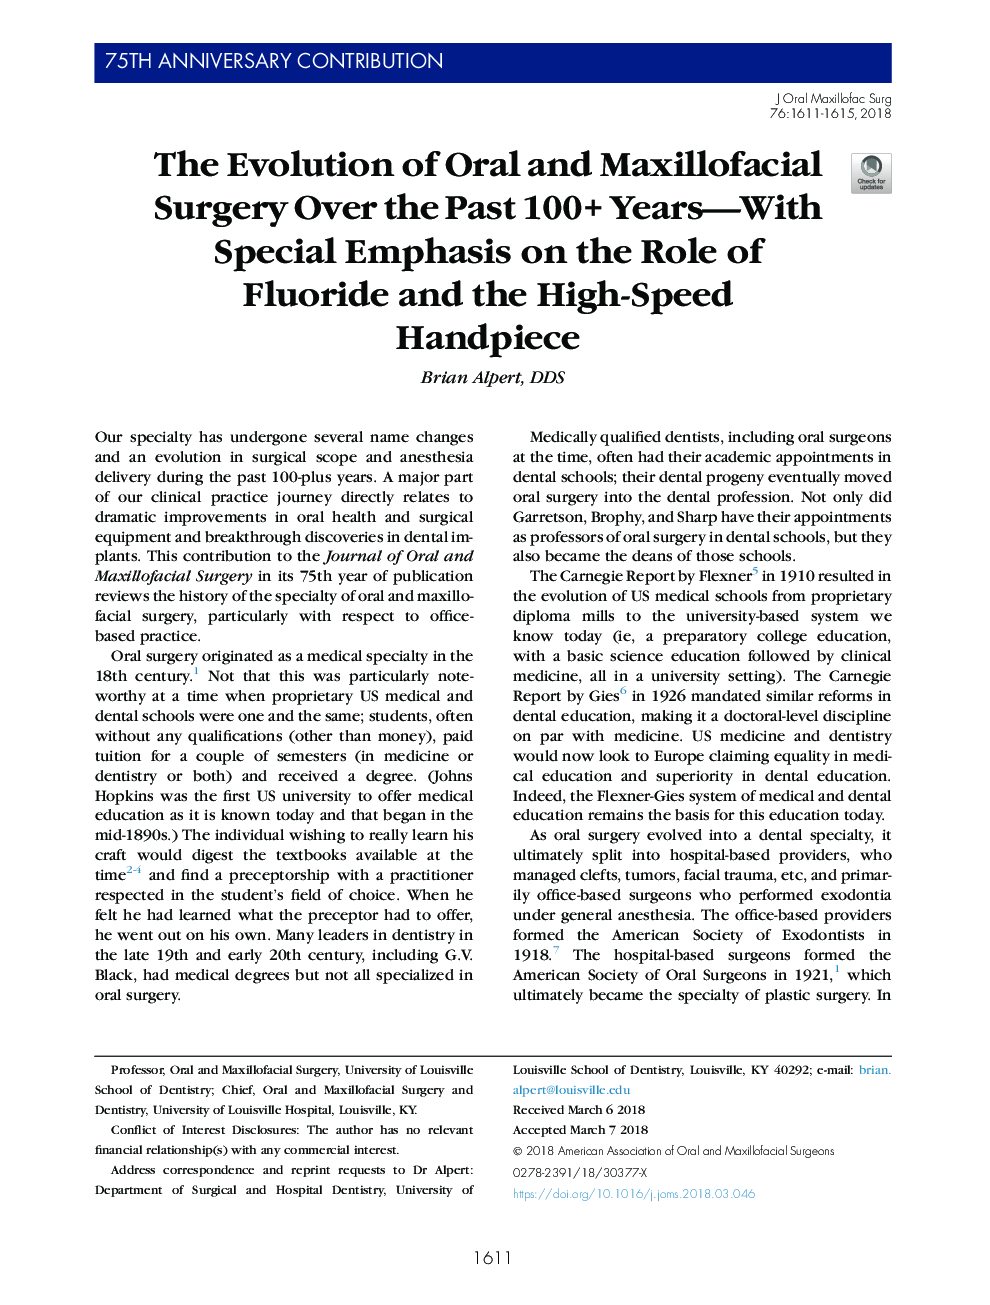 The Evolution of Oral and Maxillofacial Surgery Over the Past 100+ Years-With Special Emphasis on the Role of Fluoride and the High-Speed Handpiece